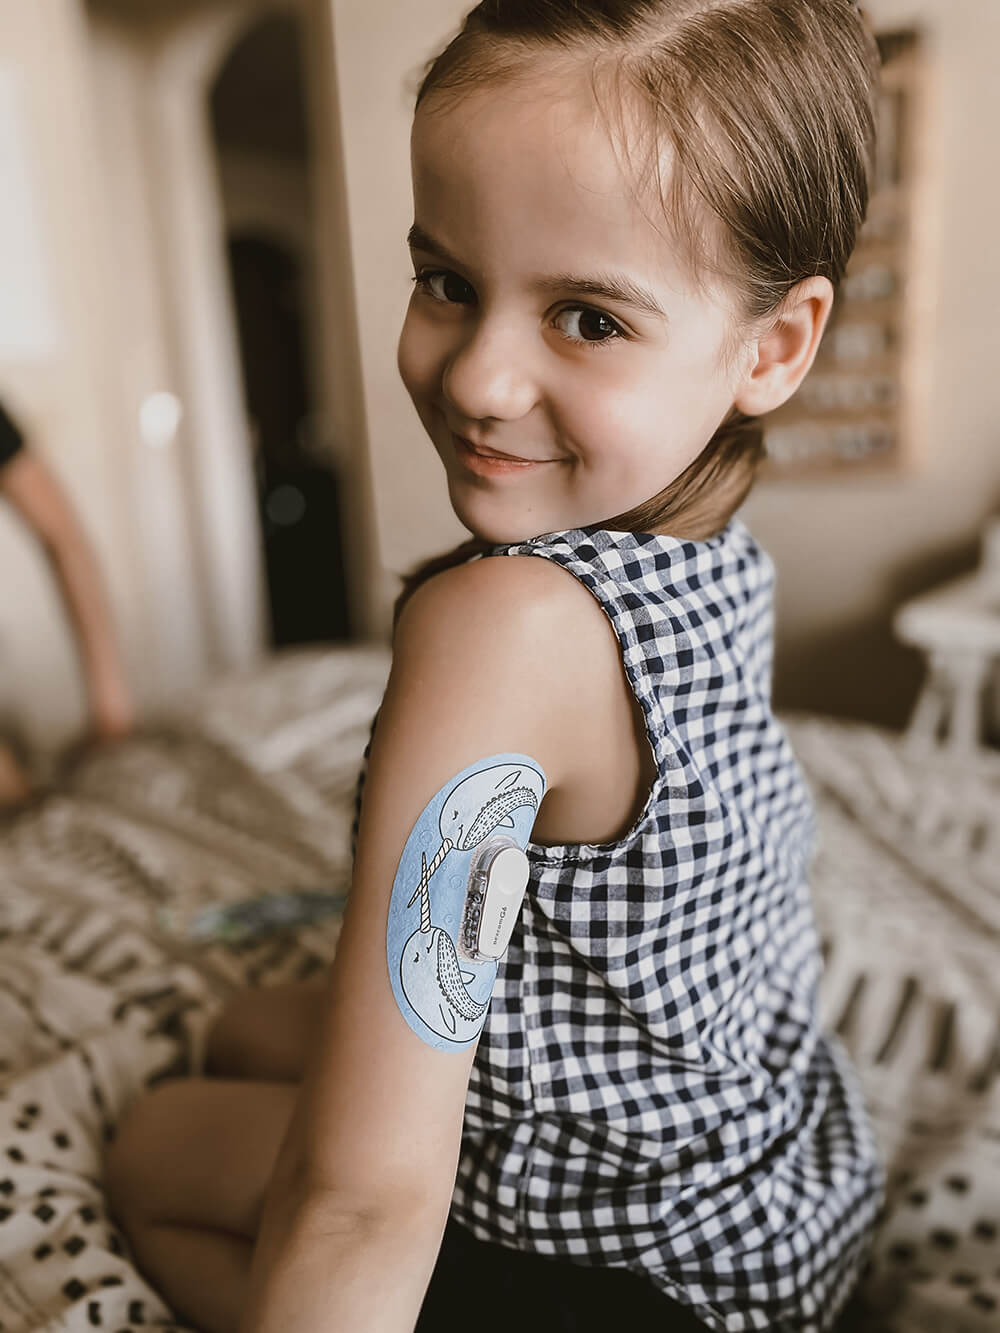 Six months since our Type 1 Diabetes diagnosis. Thought it would be a good time to share some more of our experience and what Type 1 Diabetes has taught me - both as a person as well as a mother. Read more on KaraLayne.com